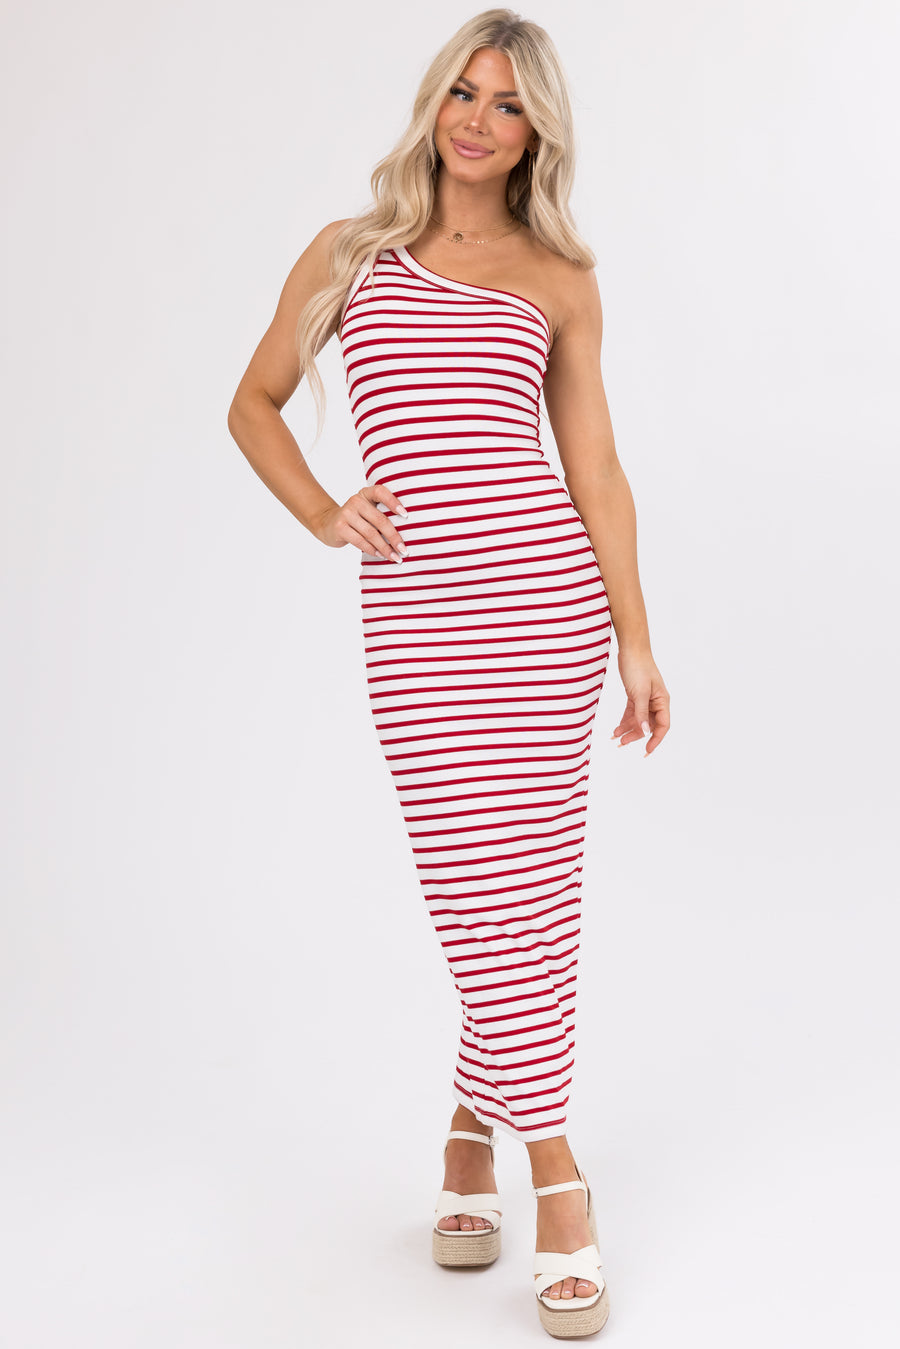 Cherry and White Striped One Shoulder Dress